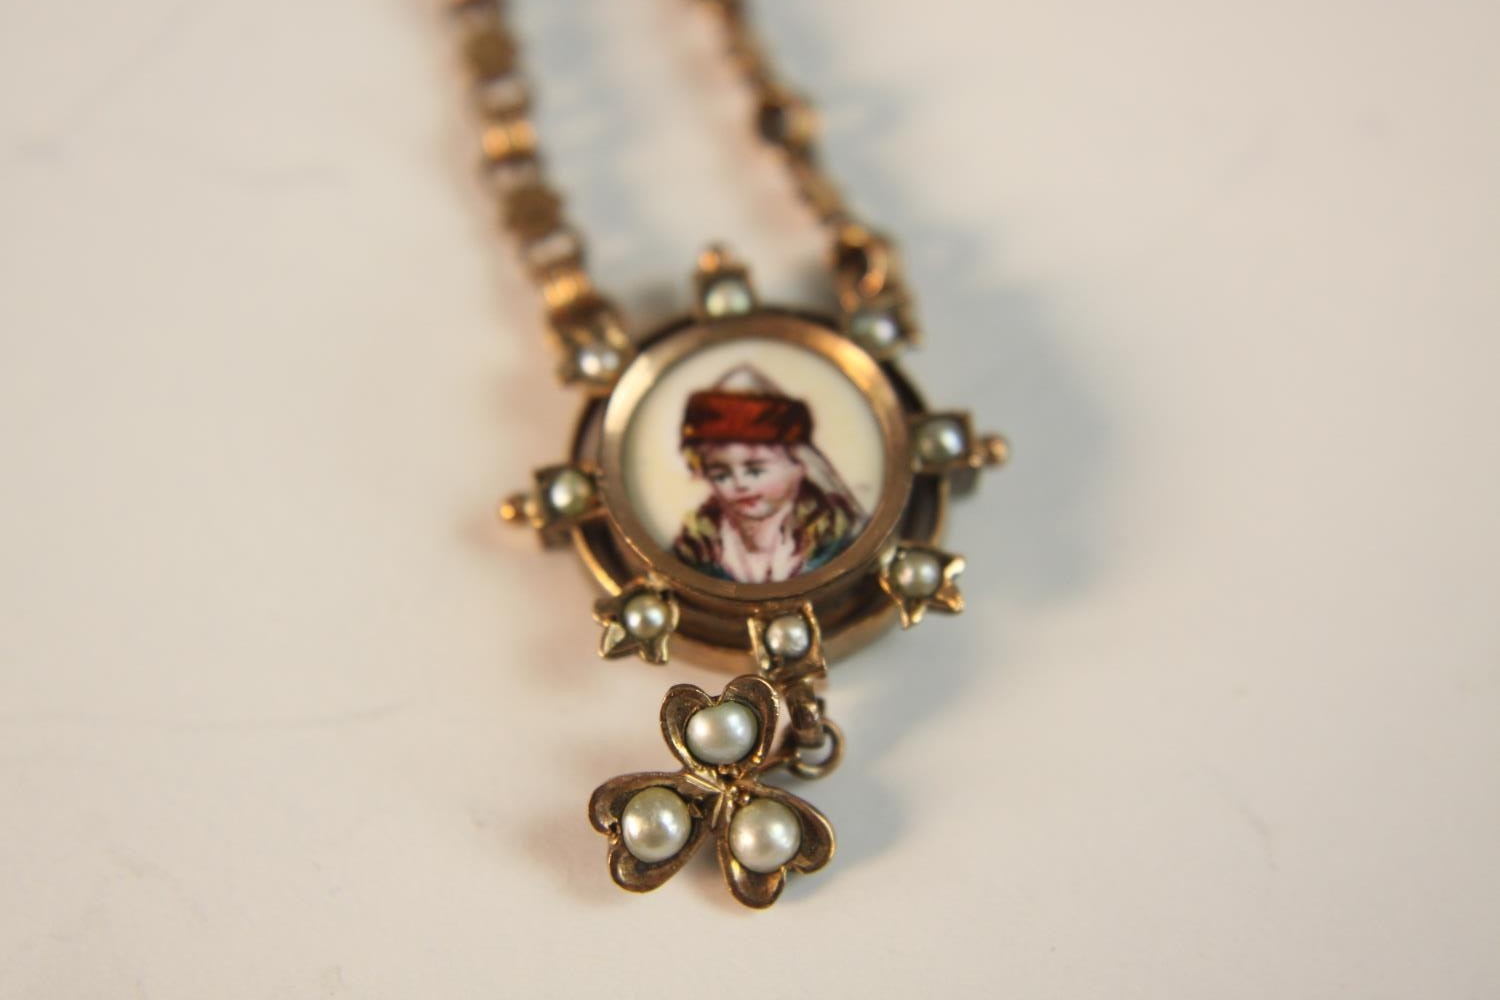 A 19th century rose gold plated watch fob, the end pendant a hand painted portrait on enamel of a - Image 3 of 7